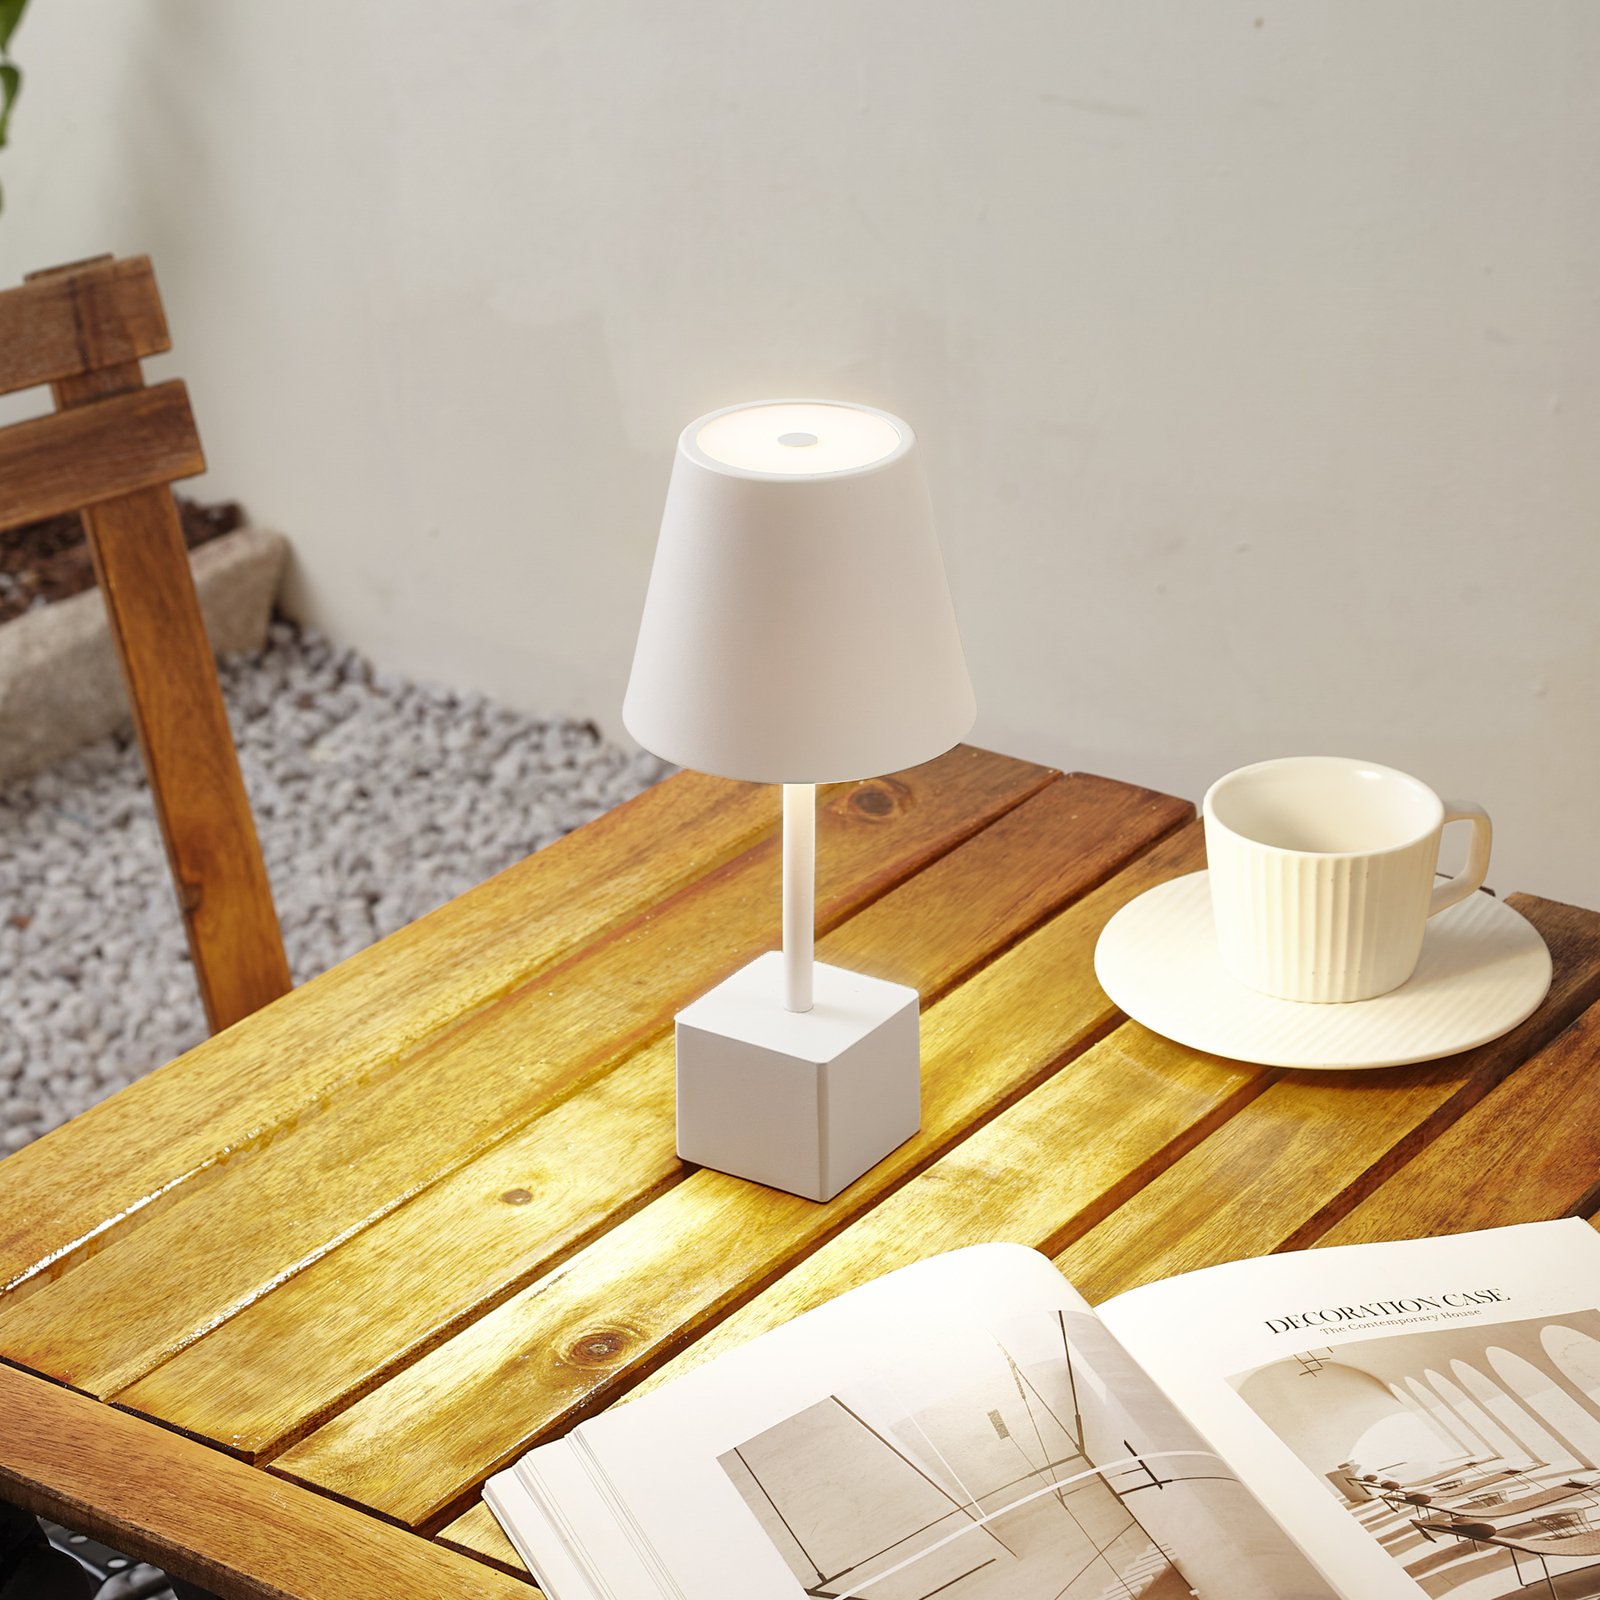 Lindby LED rechargeable table lamp Janea, cube, white, metal